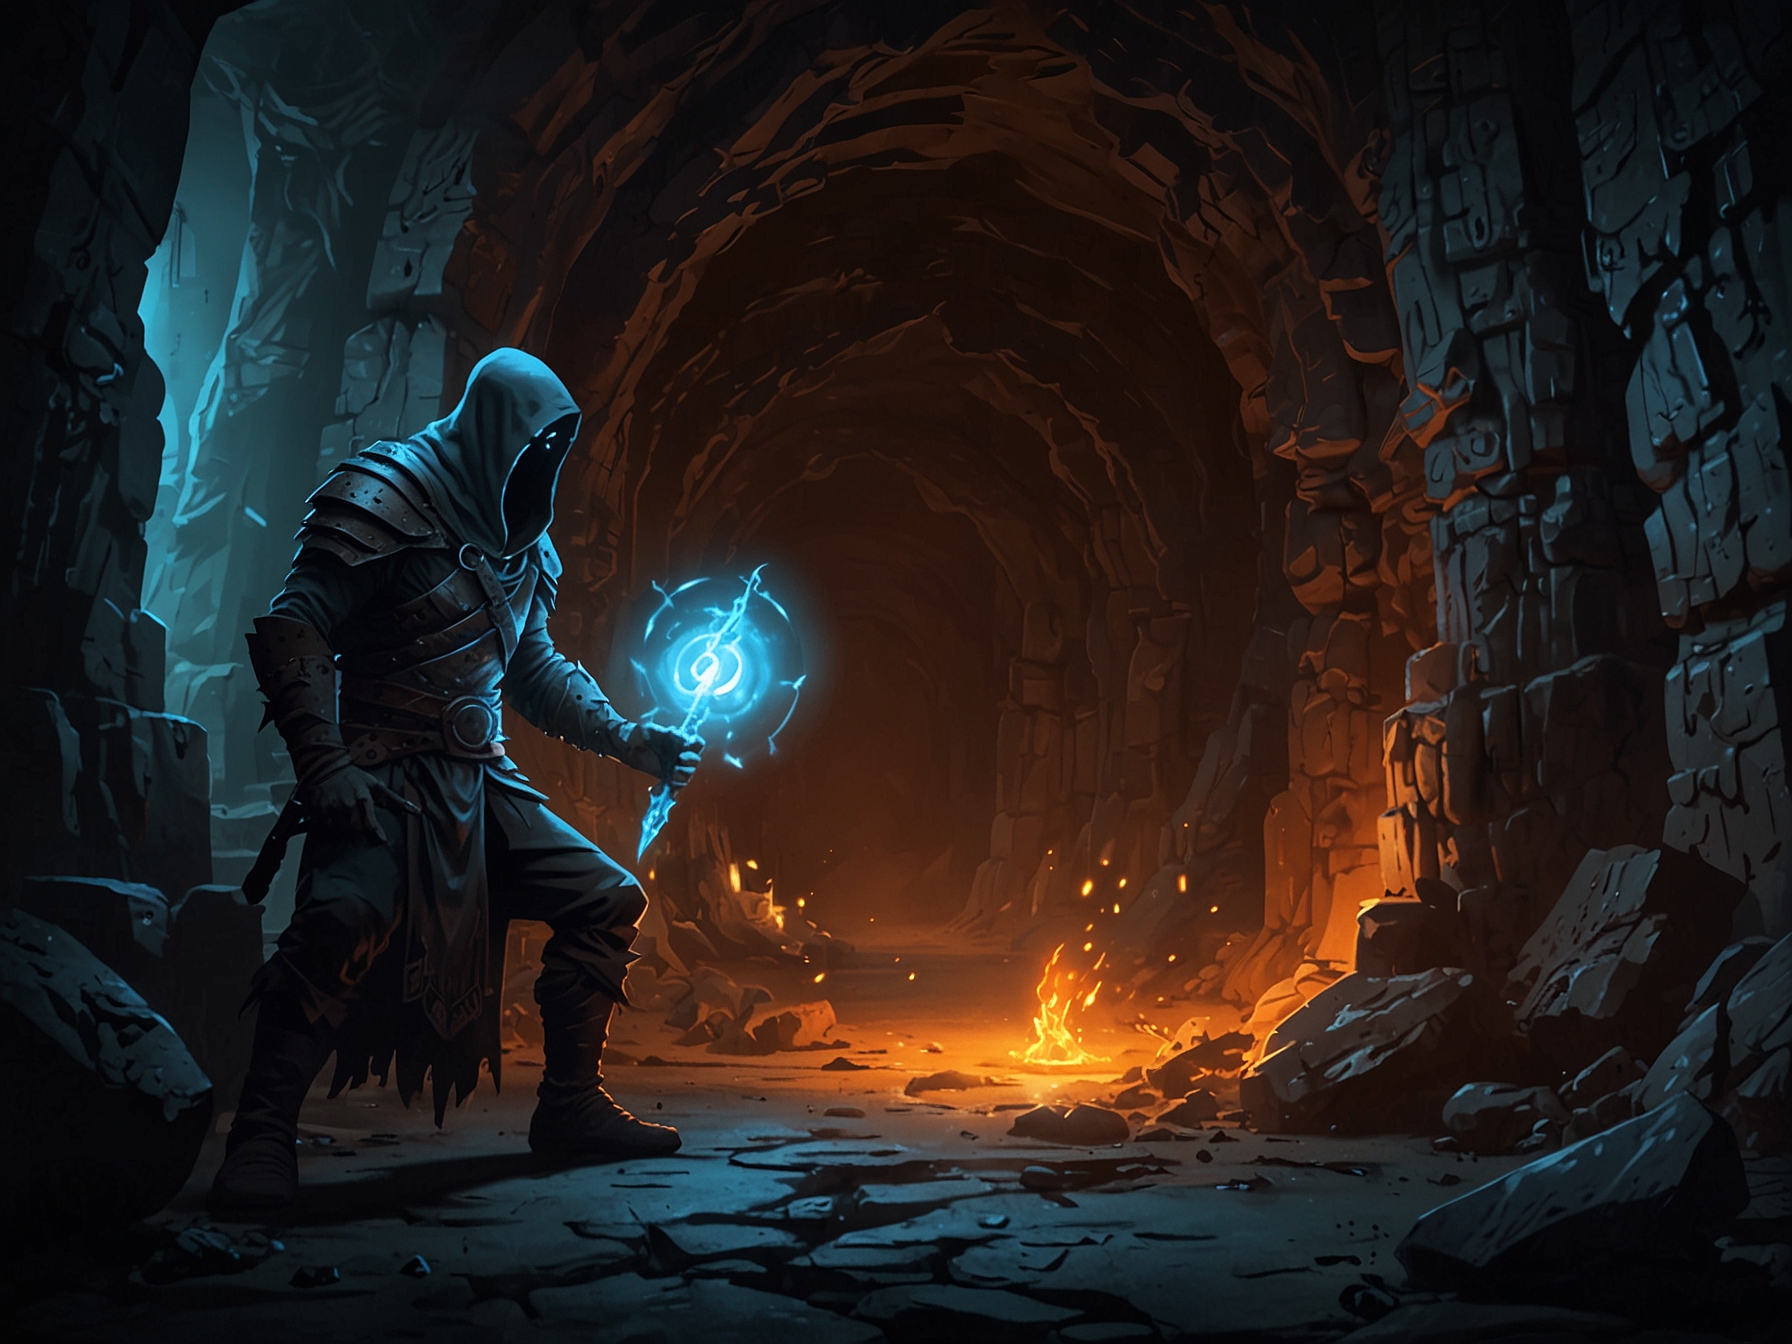 The player character battling the Nightmare Keeper in the dark, treacherous Cavern of Lost Dreams, with the cursed artifact glowing ominously in the background, ready to be retrieved.